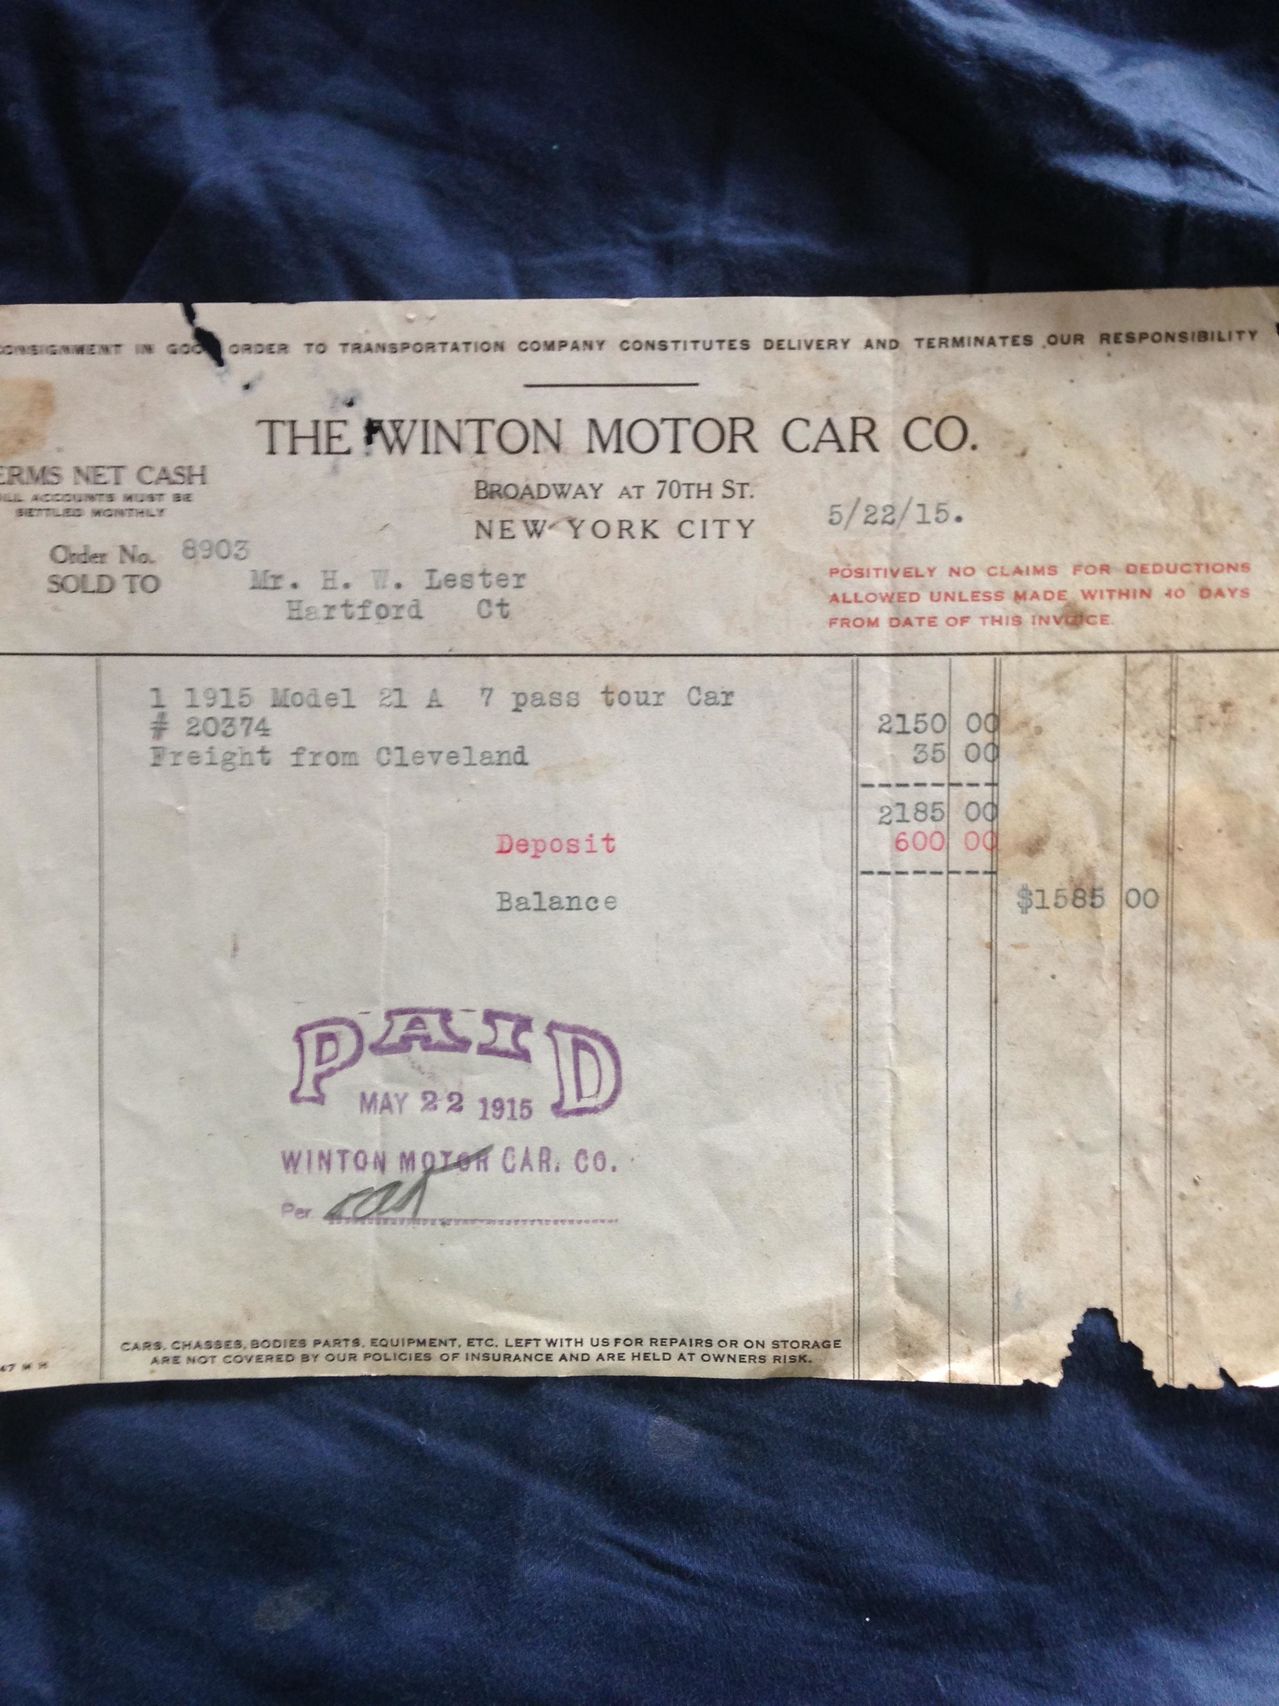 101 year old receipt for a 1915 Model A car ($2,185.00 in 1915 had the same buying power as $51,169.02 in 2016)